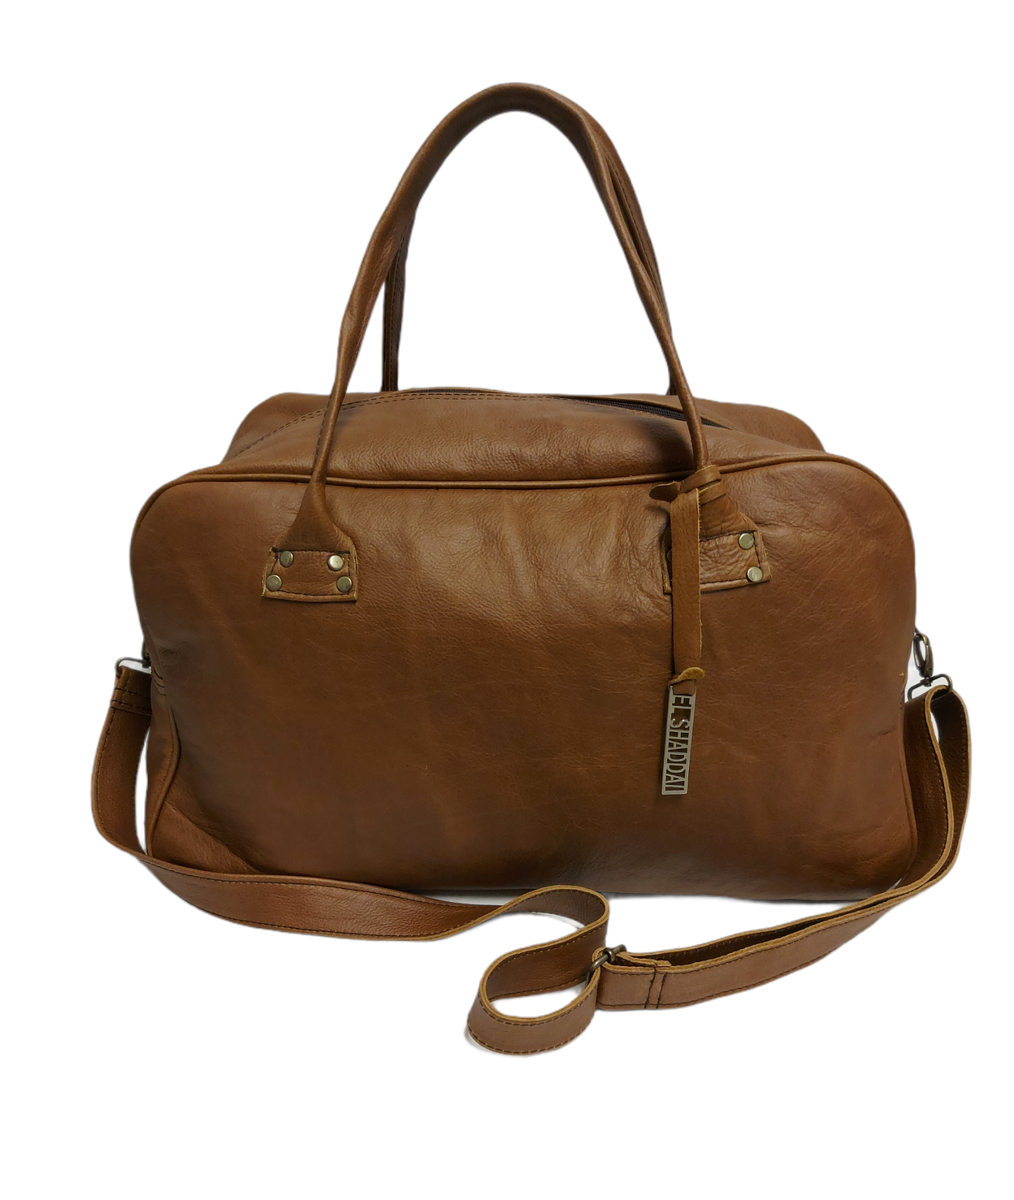 EL Shaddai Leather - Ruth Travel bag - Brown | Buy Online in South ...